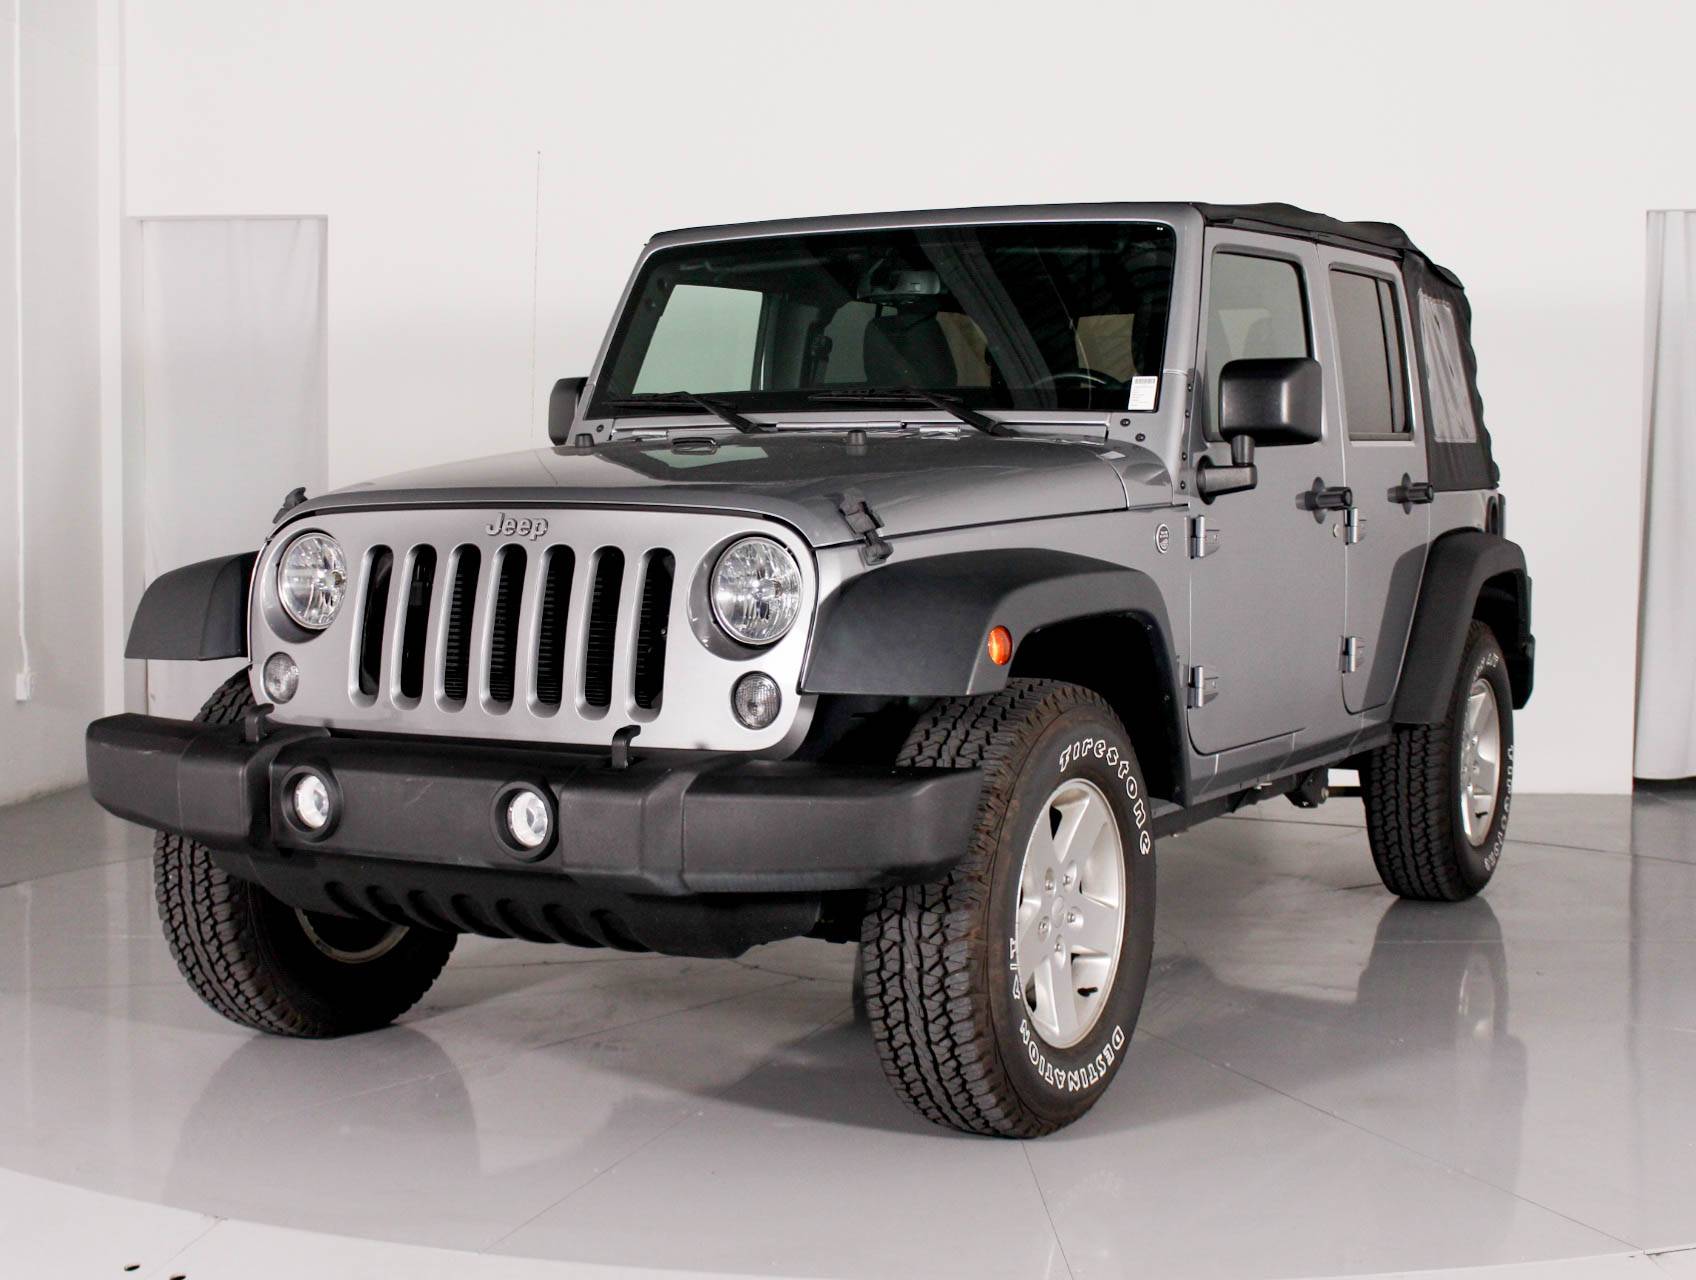 Used 2015 JEEP WRANGLER UNLIMITED SPORT for sale in MIAMI | 95443